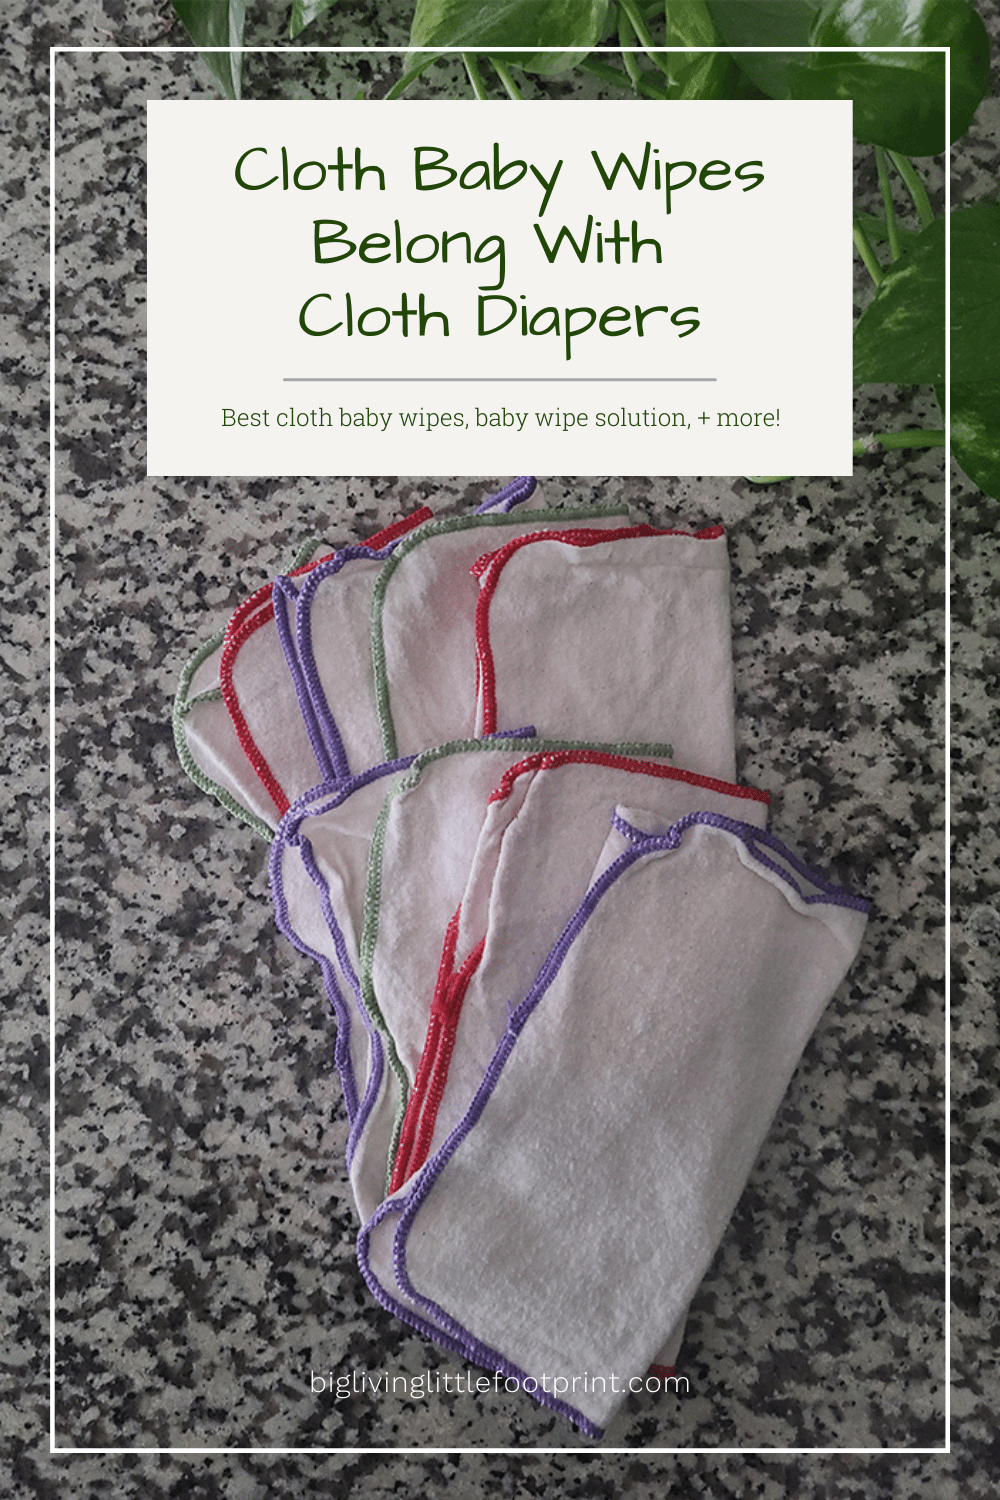 Cloth Baby Wipes Belong with Cloth Diapers